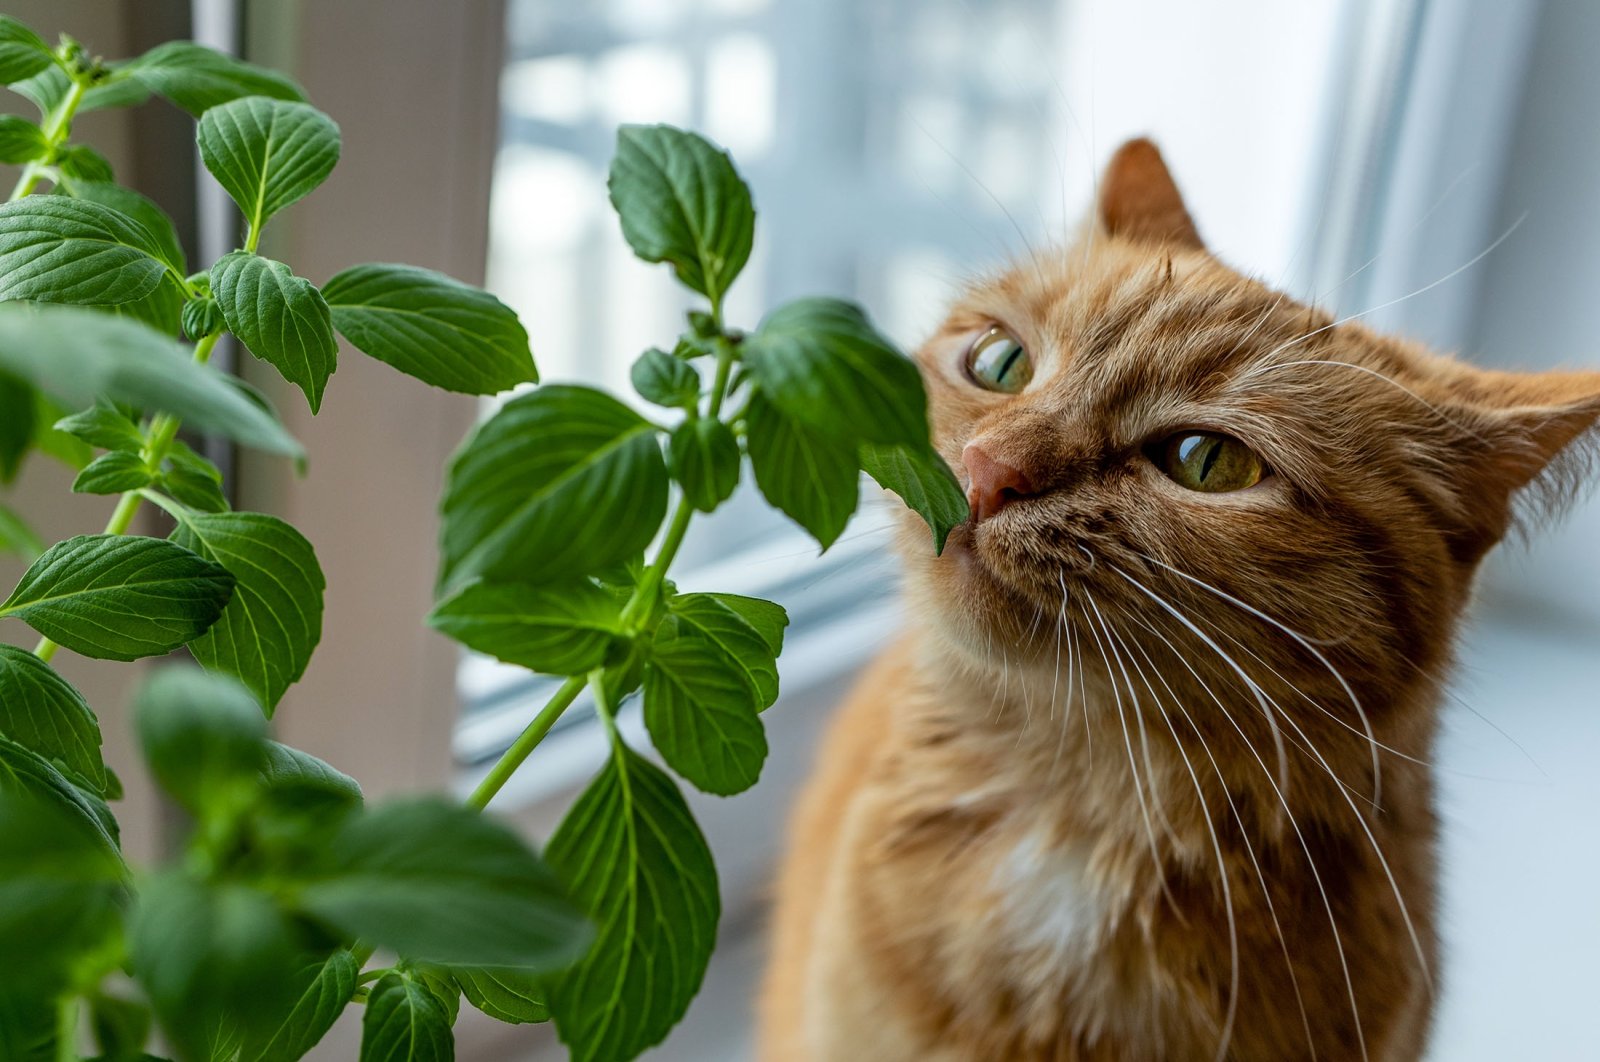 If your cat seems to be craving a potted plant salad lately, try to make it as unappealing as possible or pay more attention. (Shutterstock Photo)